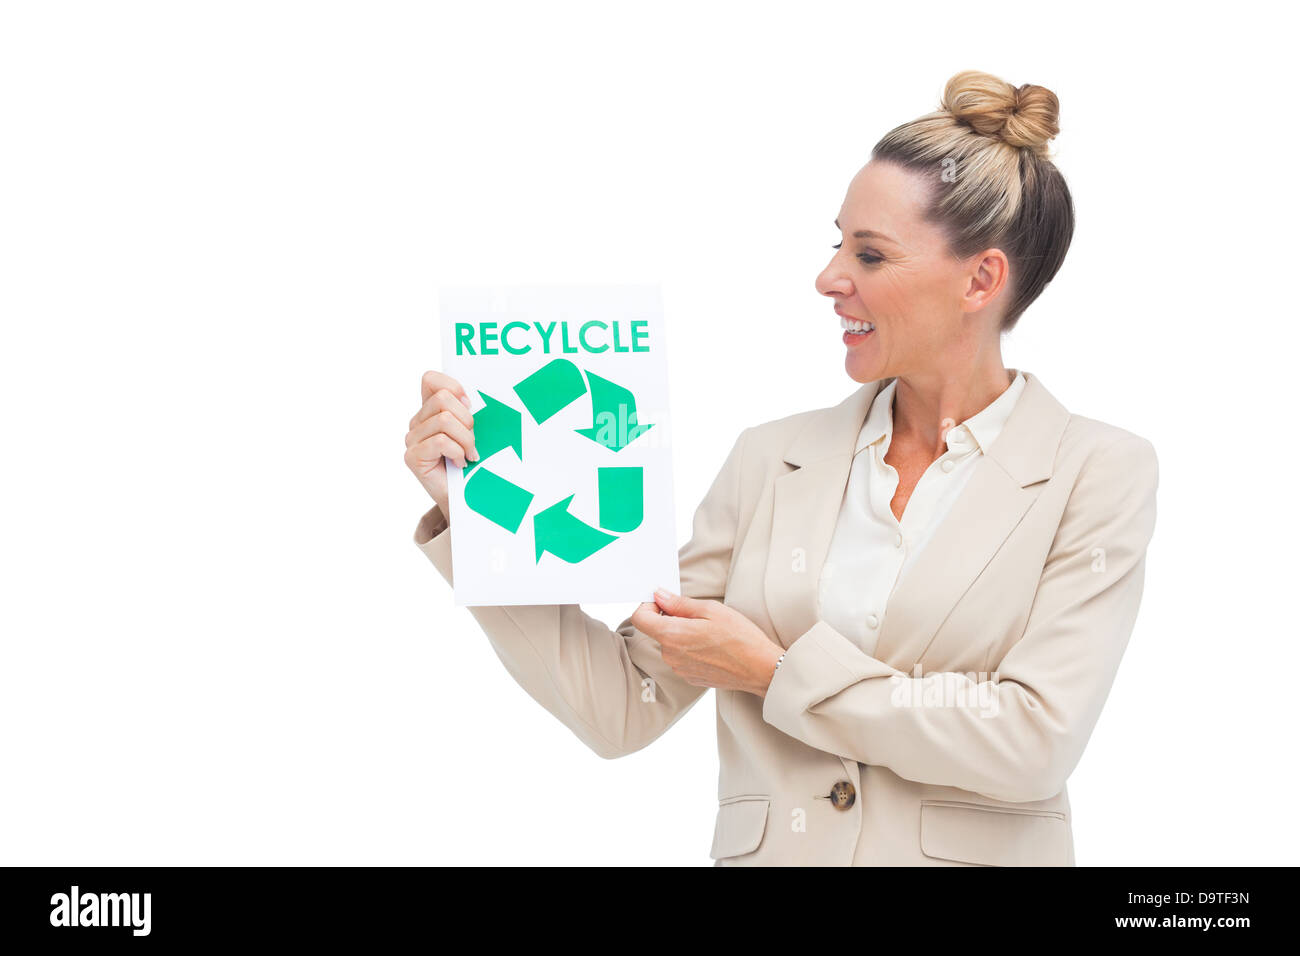 Businesswoman looking at recycling logo on paper Stock Photo